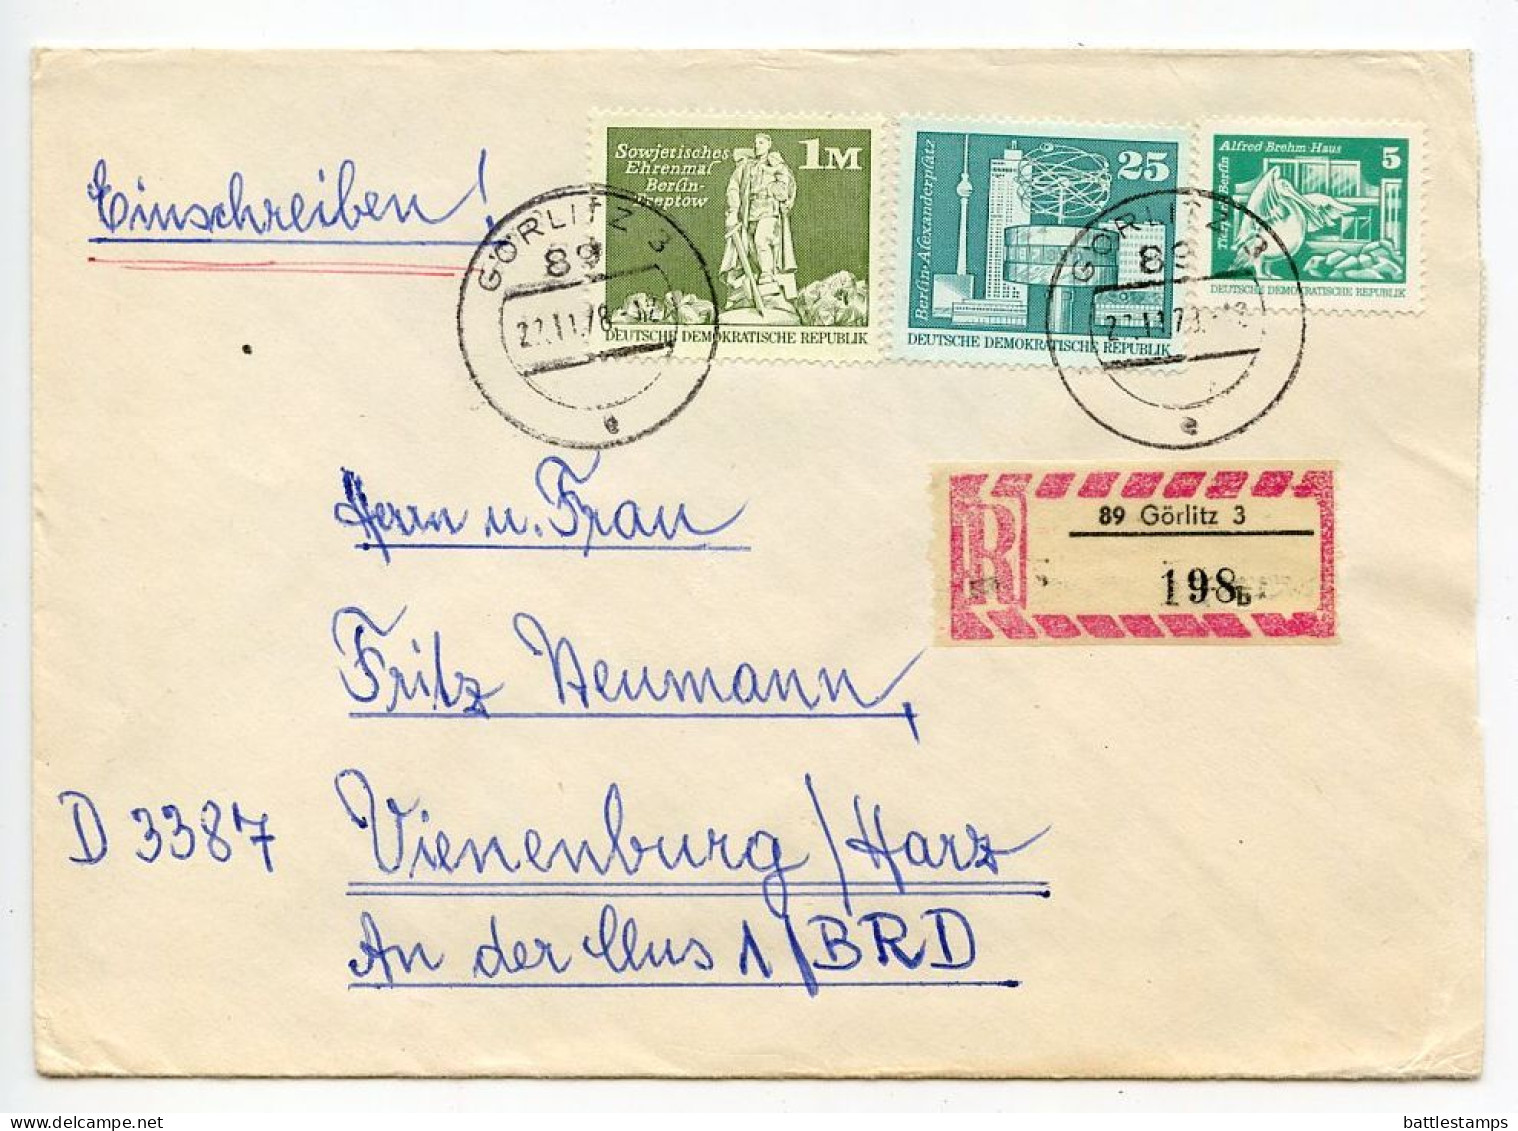 Germany East 1978 Registered Cover; Görlitz To Vienenburg; Mix Of Stamps; Tauschsendung Exchange Control Label - Covers & Documents